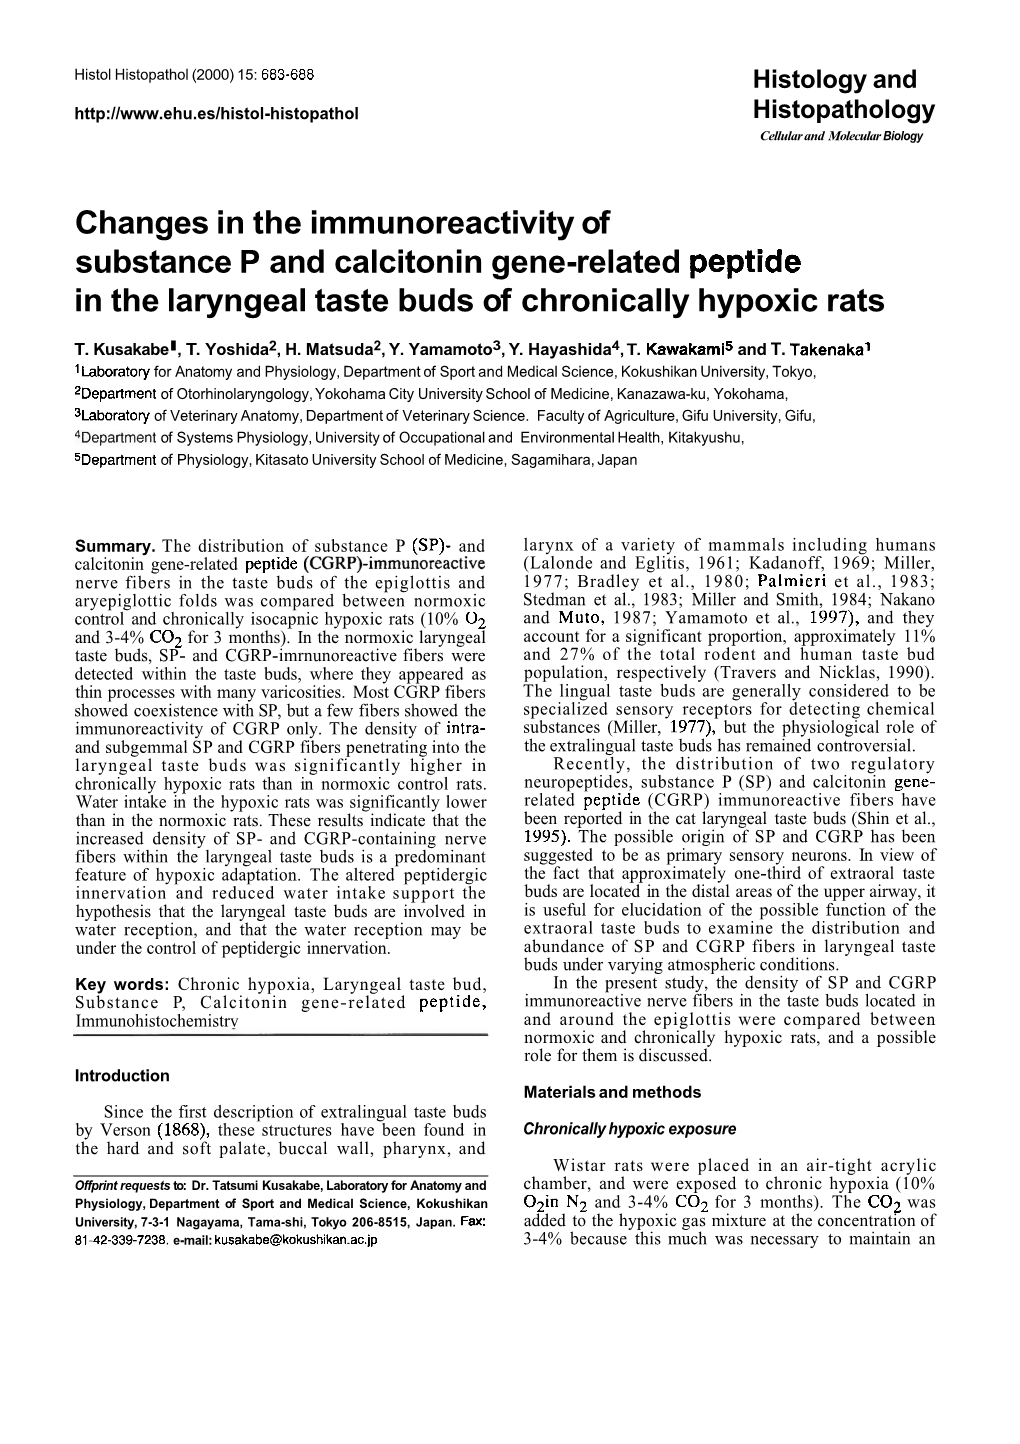 Changes in the Immunoreactivity of Substance P and Calcitonin Gene-Related Peptide in the Laryngeal Taste Buds of Chronically Hypoxic Rats